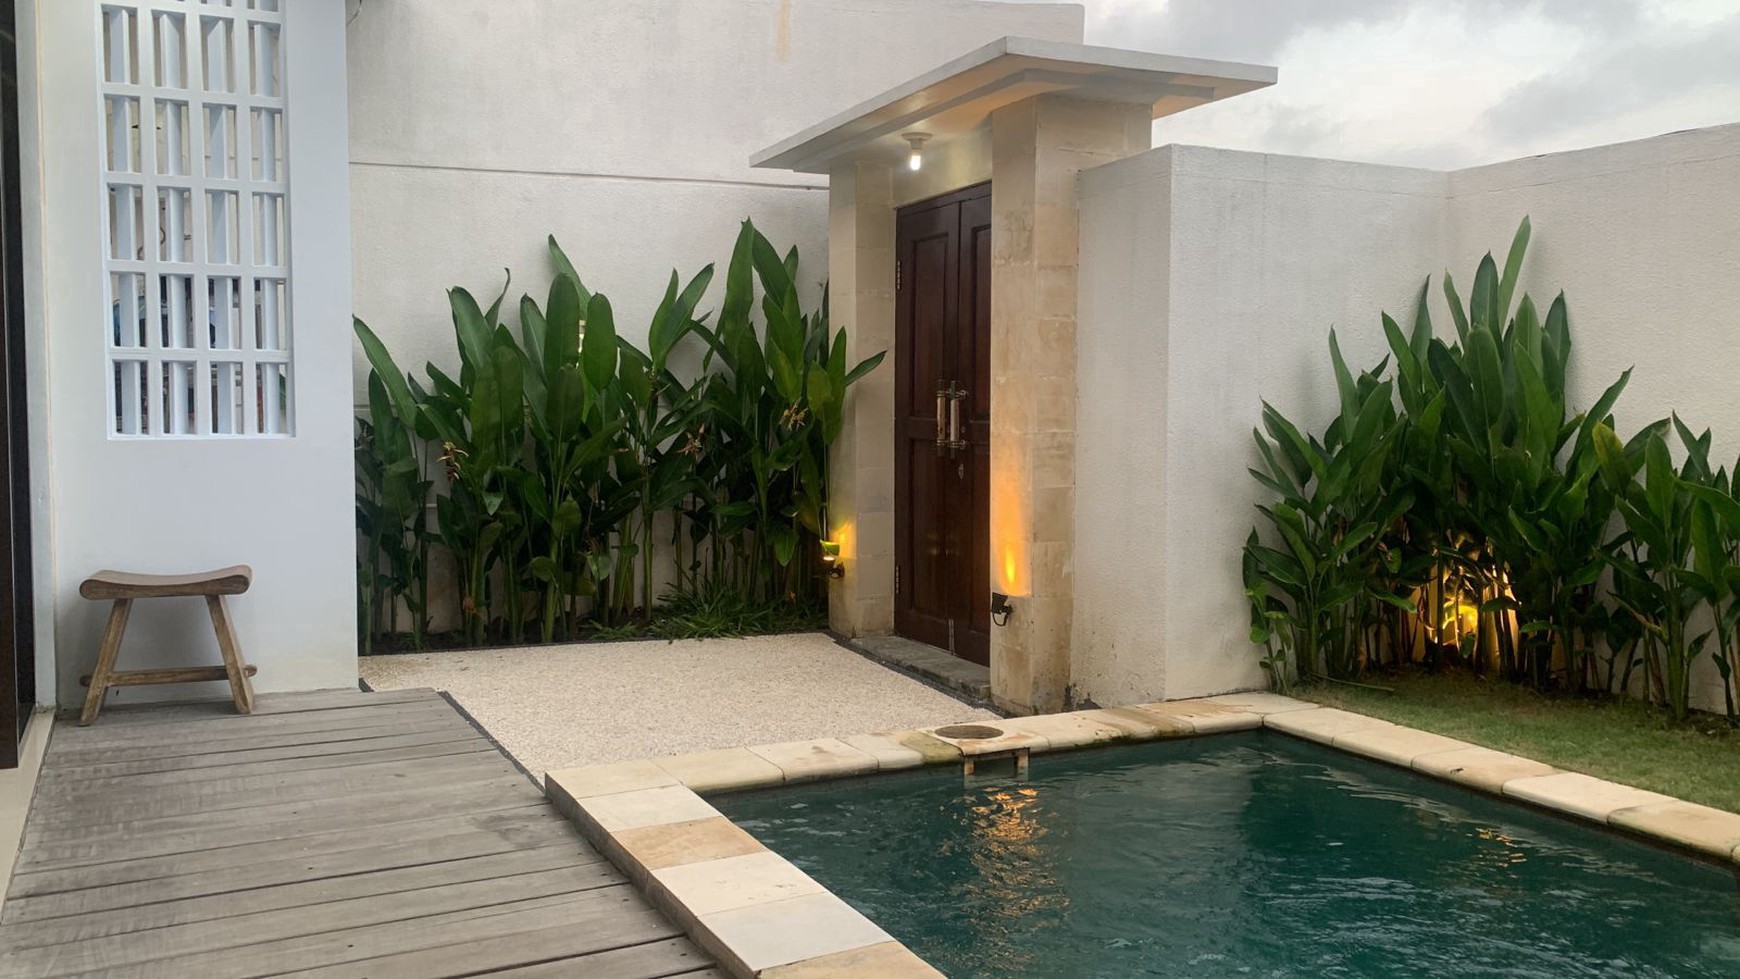 For Rent Yearly - Brand new minimalis modern villa with rice field view in Canggu